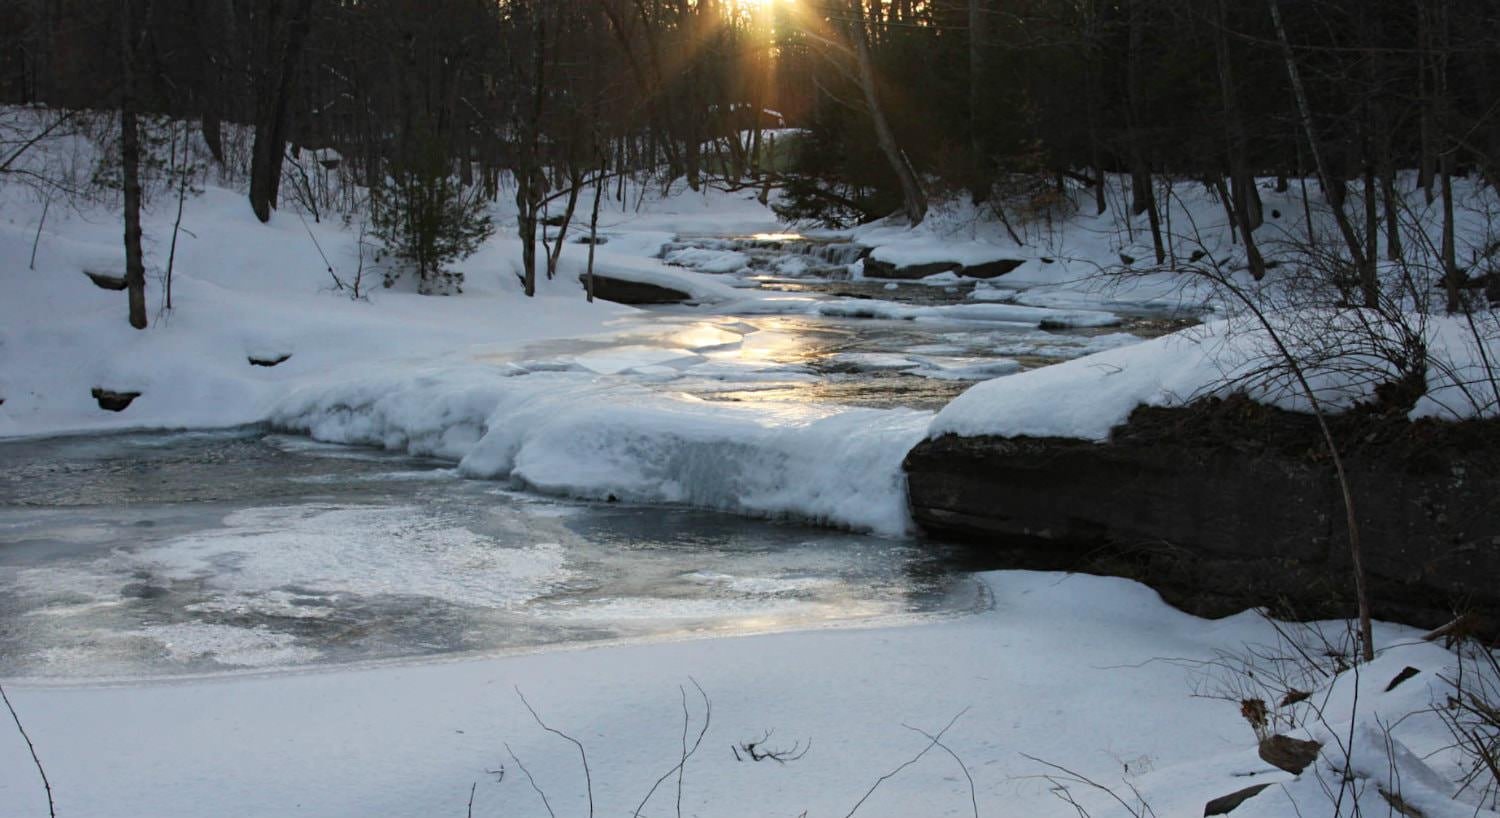 White snow and ice covered stream and woods with a golden setting sun in the distance